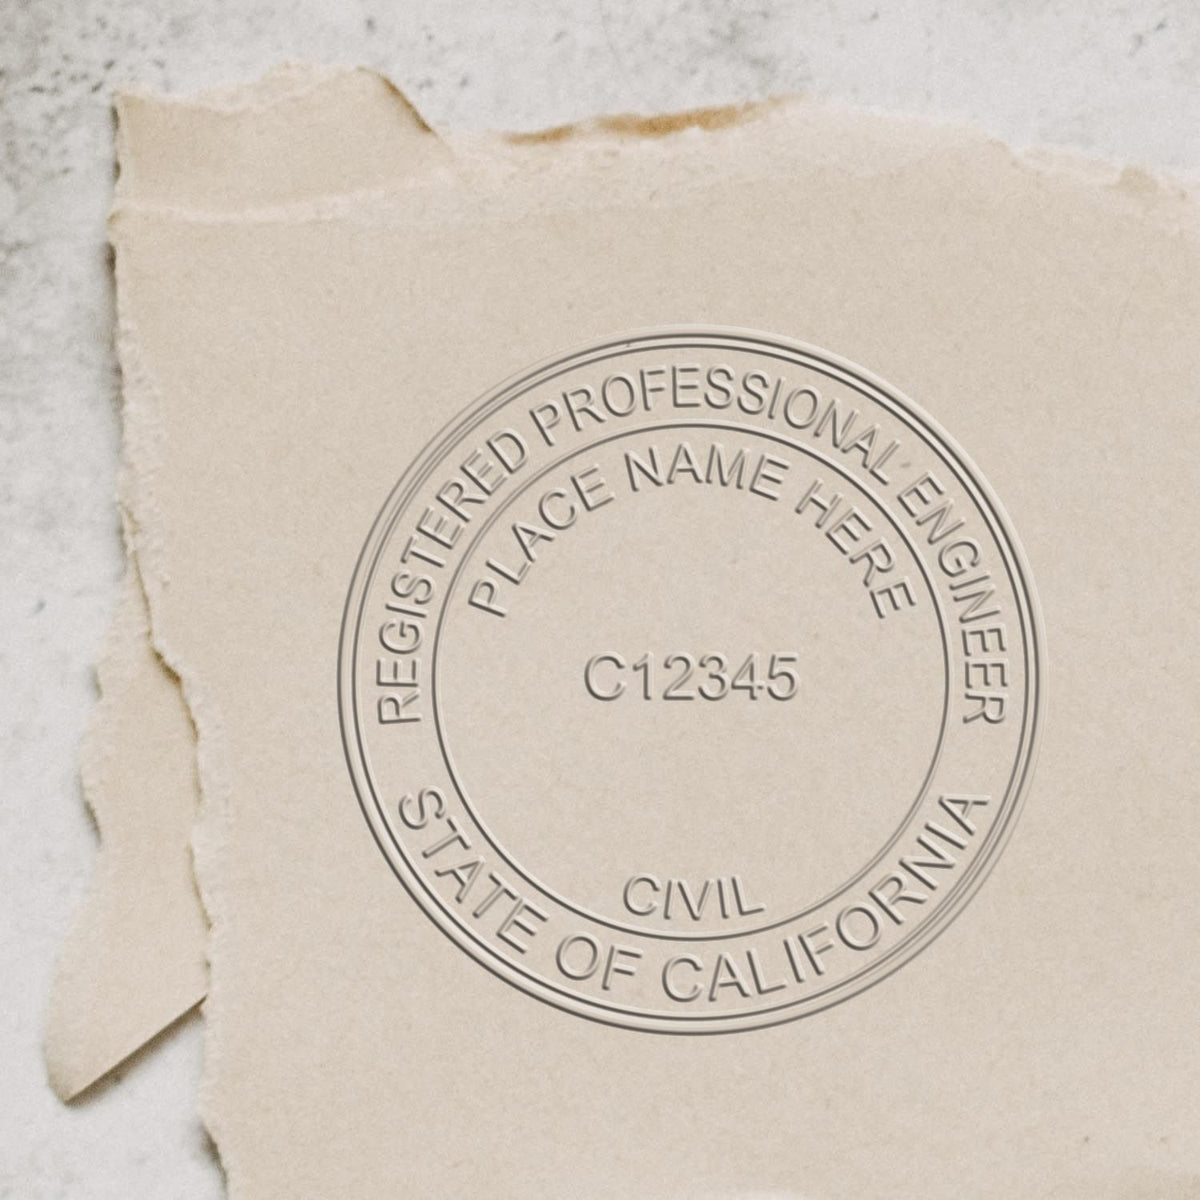 The State of California Extended Long Reach Engineer Seal stamp impression comes to life with a crisp, detailed photo on paper - showcasing true professional quality.